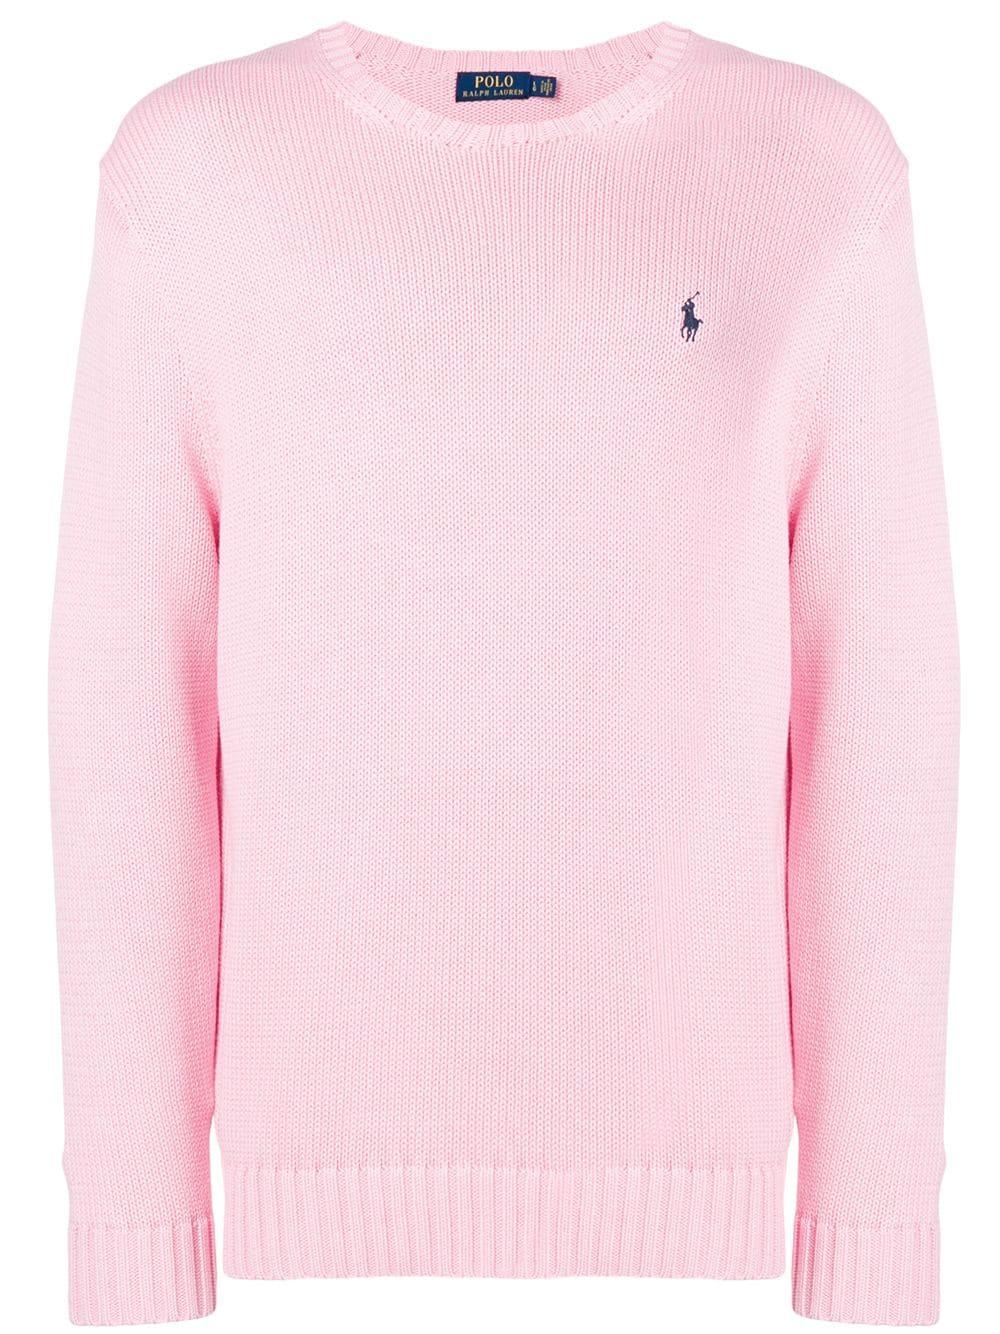 Polo Ralph Lauren Cotton Logo Embroidered Sweater in Pink for Men - Lyst